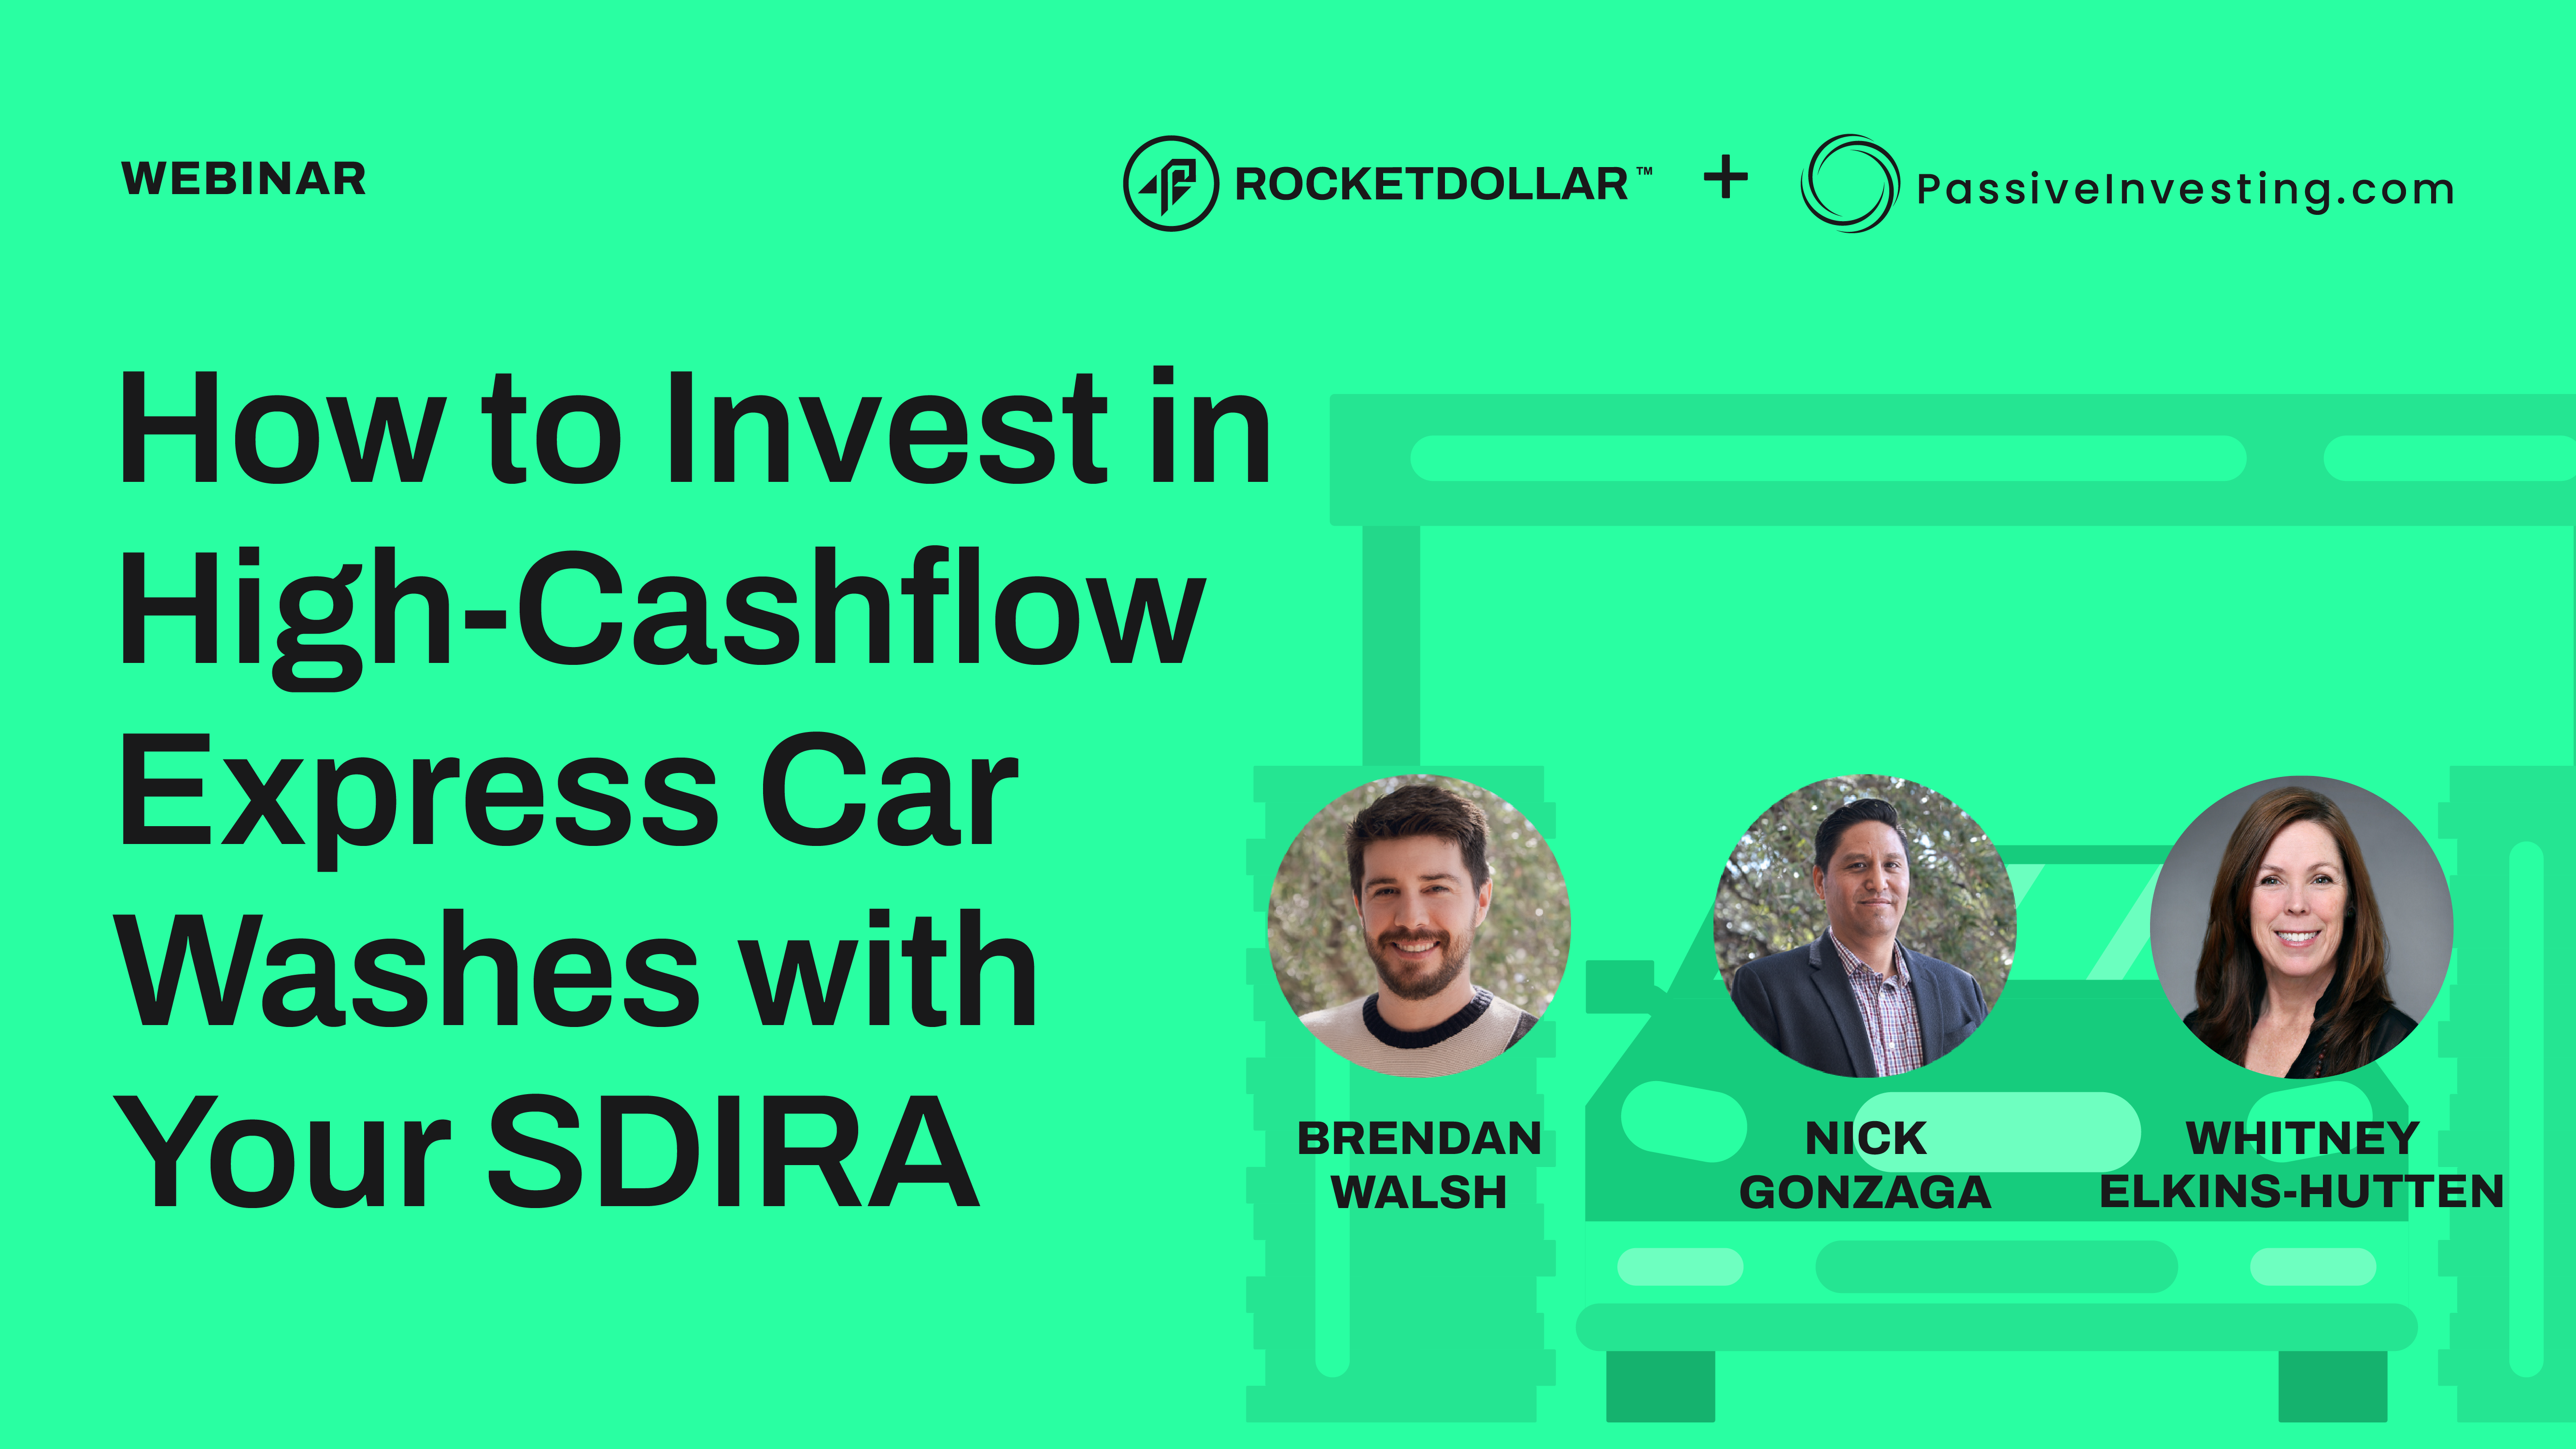 How to Invest in High-Cashflow Express Car Washes with Your SDIRA